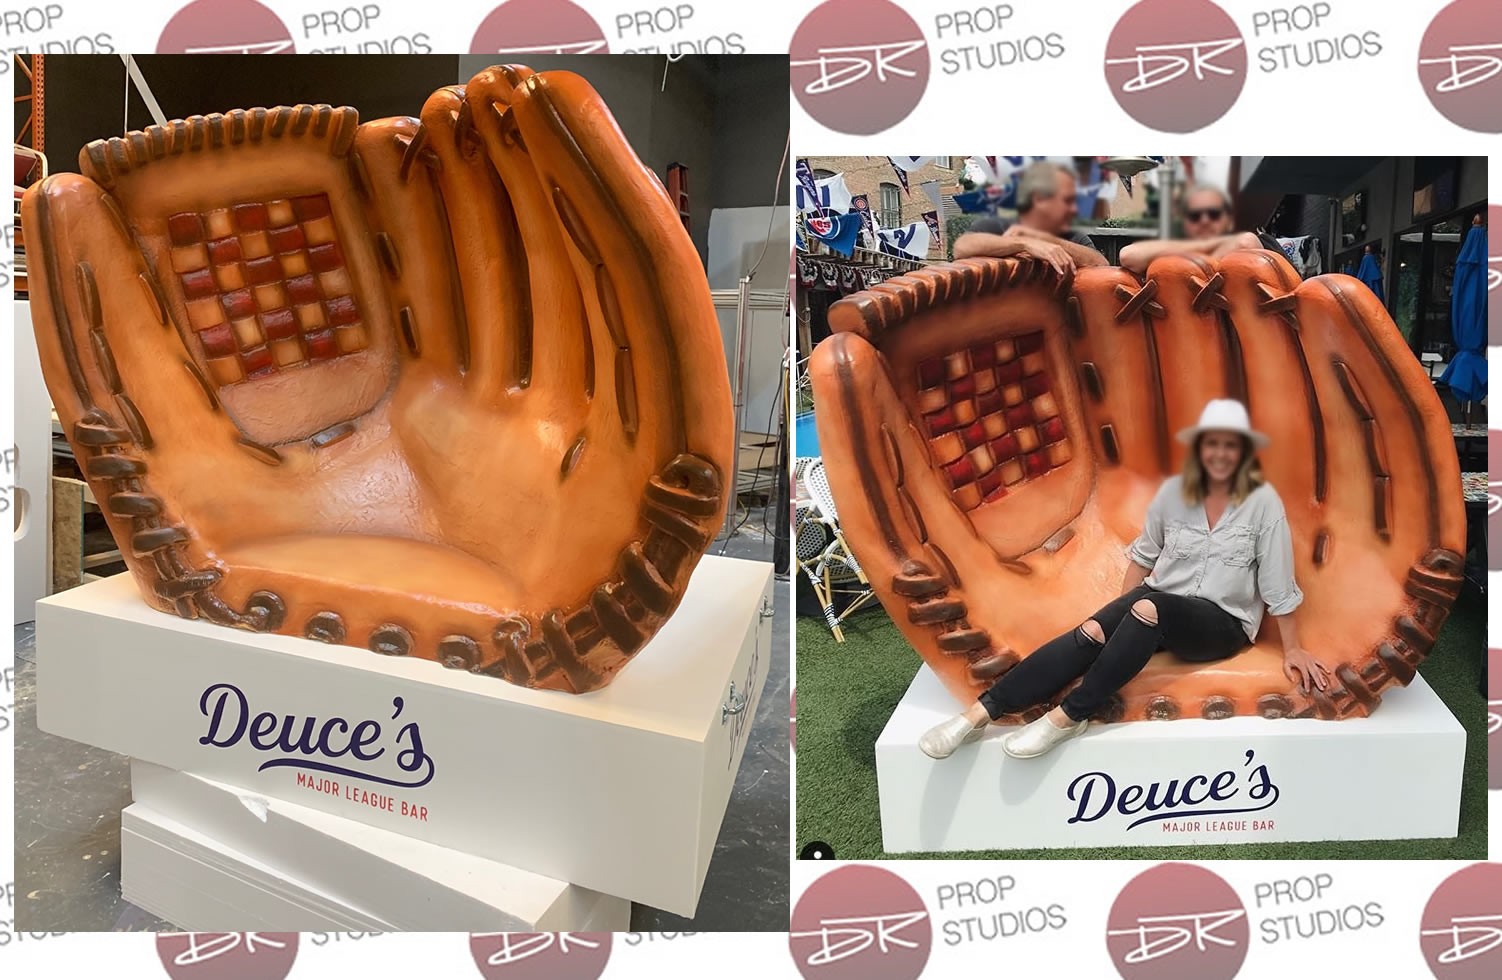 Large Foam Baseball Glove Seat Chair for Deuce's Major League Bar in Chicagpo